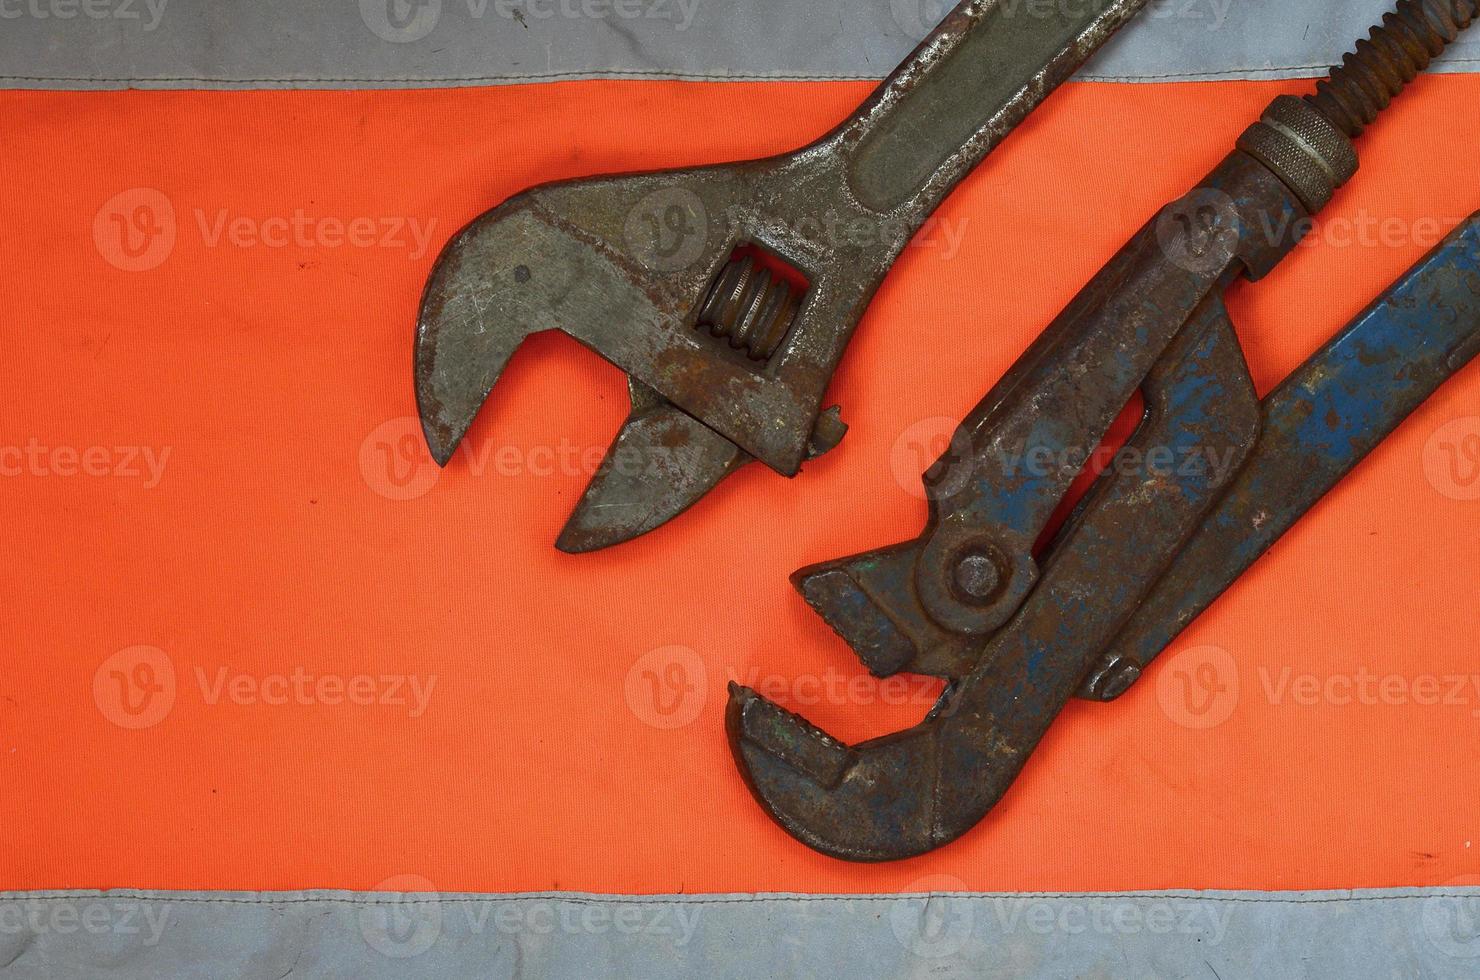 Adjustable and pipe wrenches against the background of an orange signal worker shirt photo